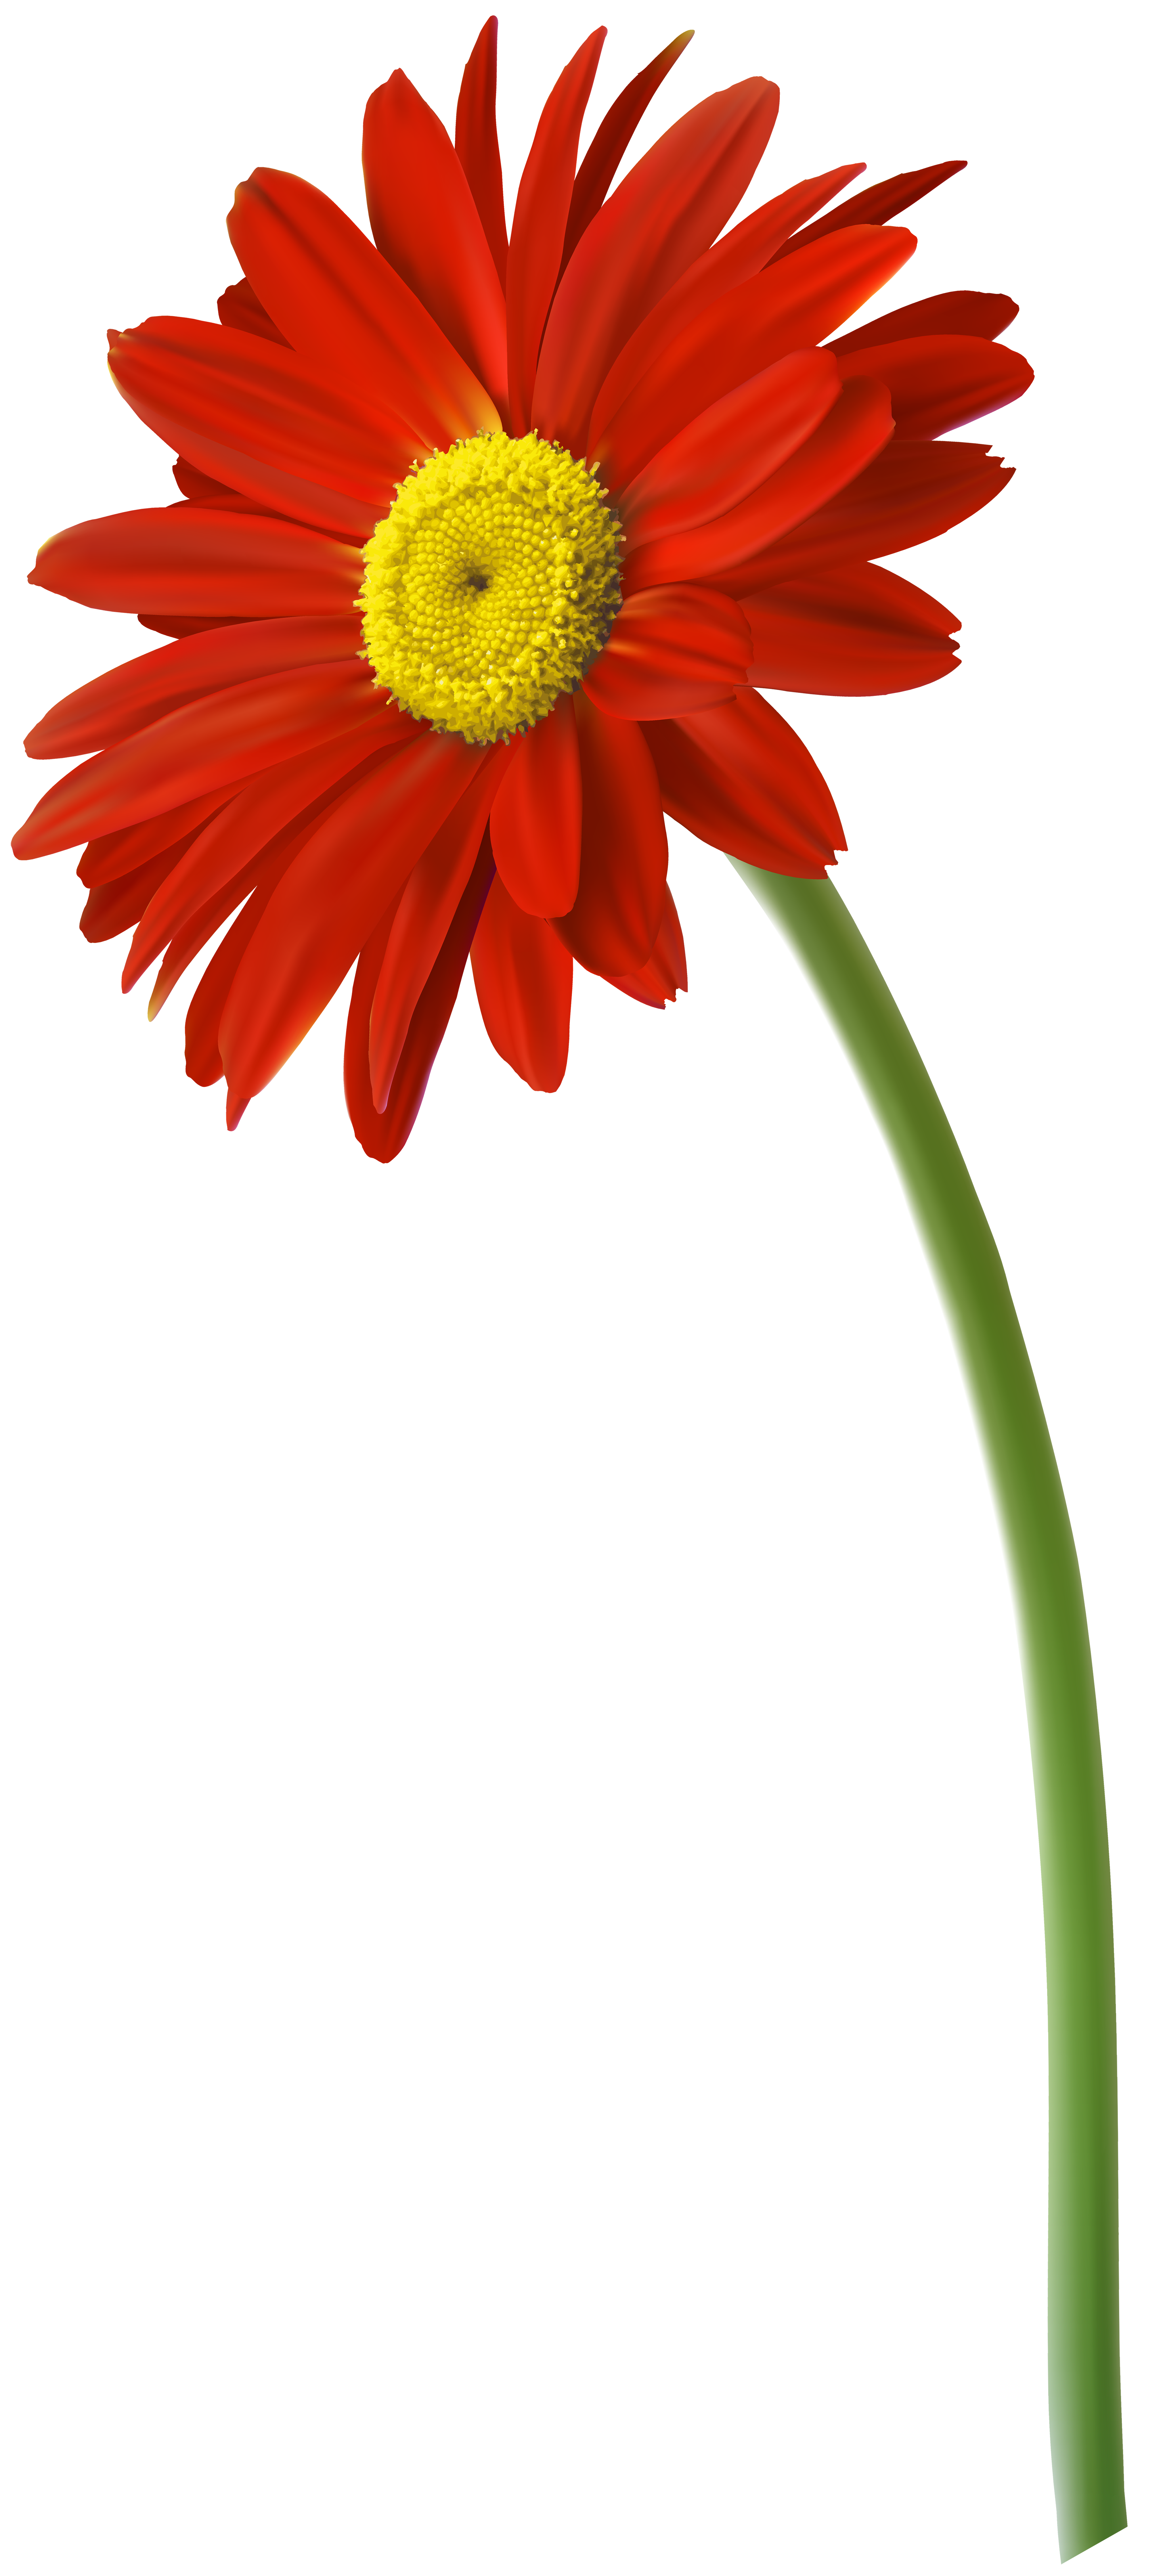 Daisy clipart colorful daisy. Red gerbera flower png